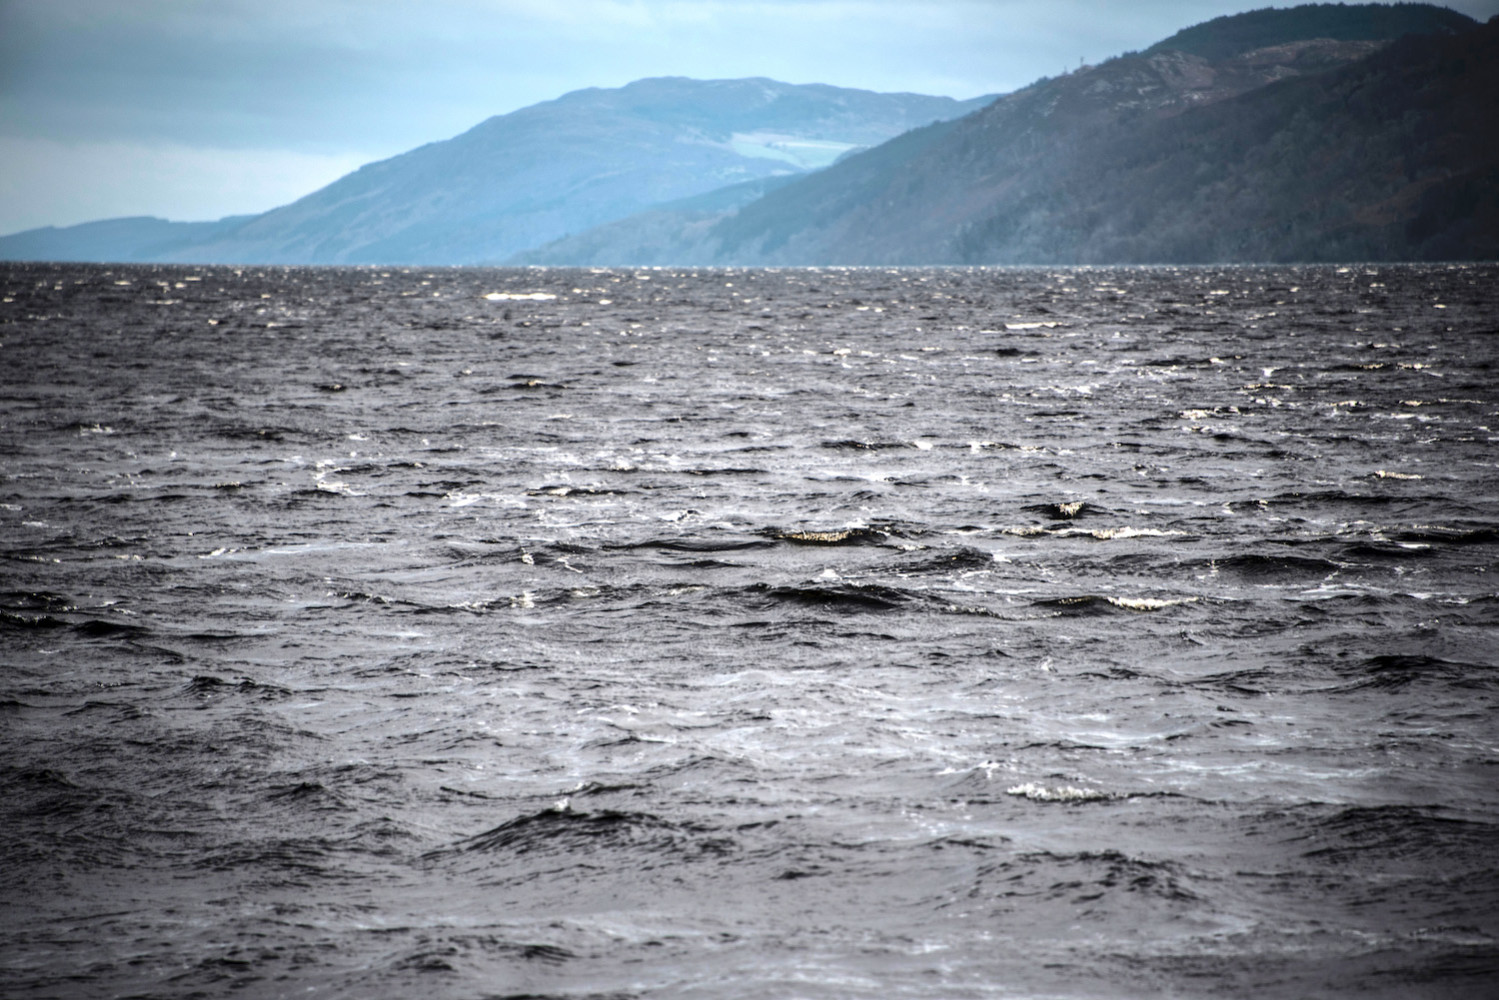 Is Loch Ness Worth Visiting?